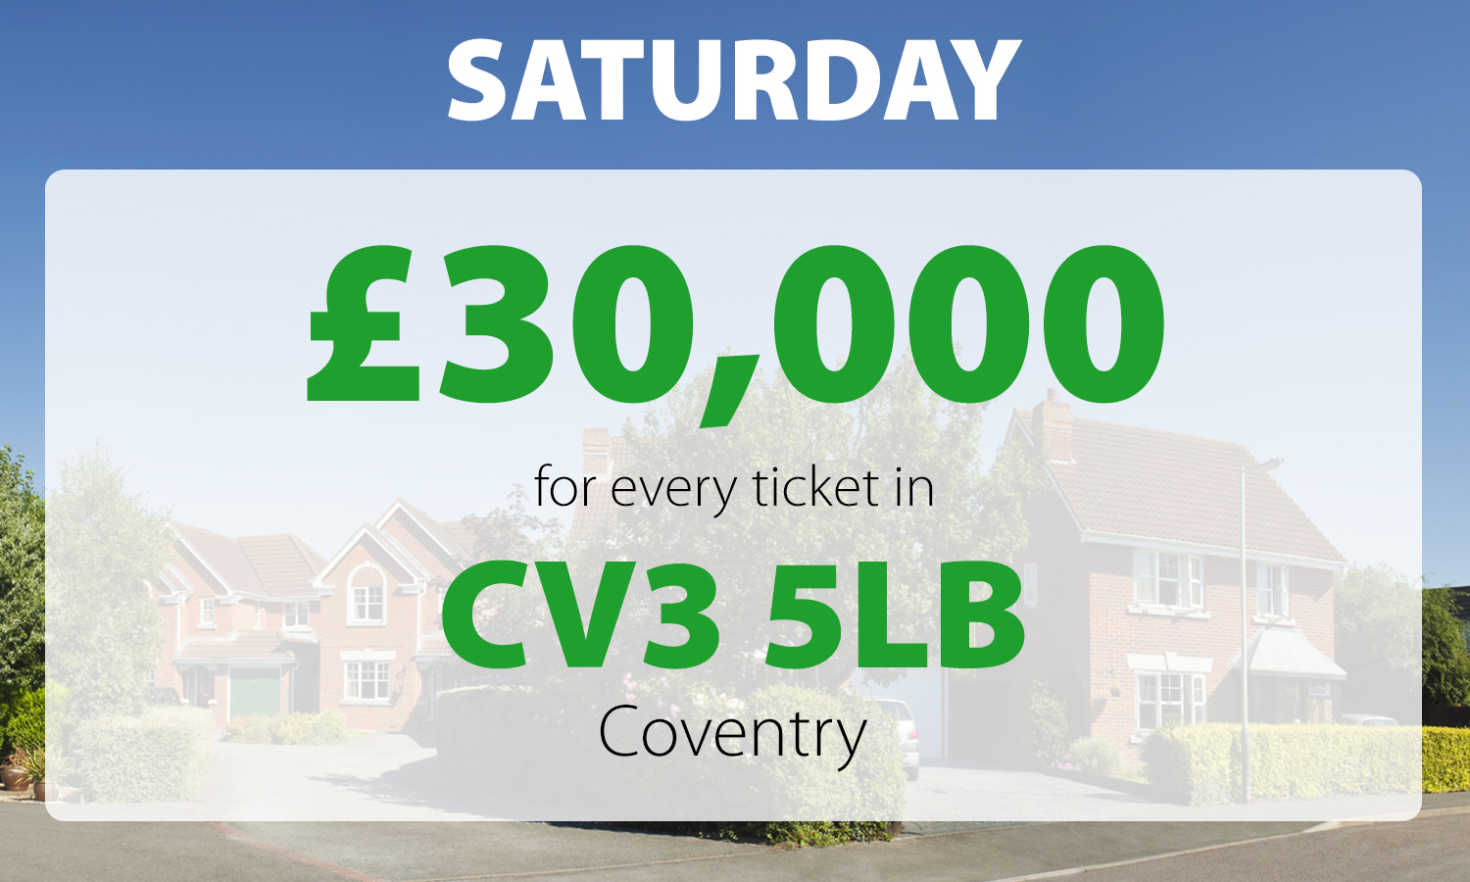 Lady Luck landed in Coventry on Sunday with whopping £30,000 cheques for two very lucky neighbours